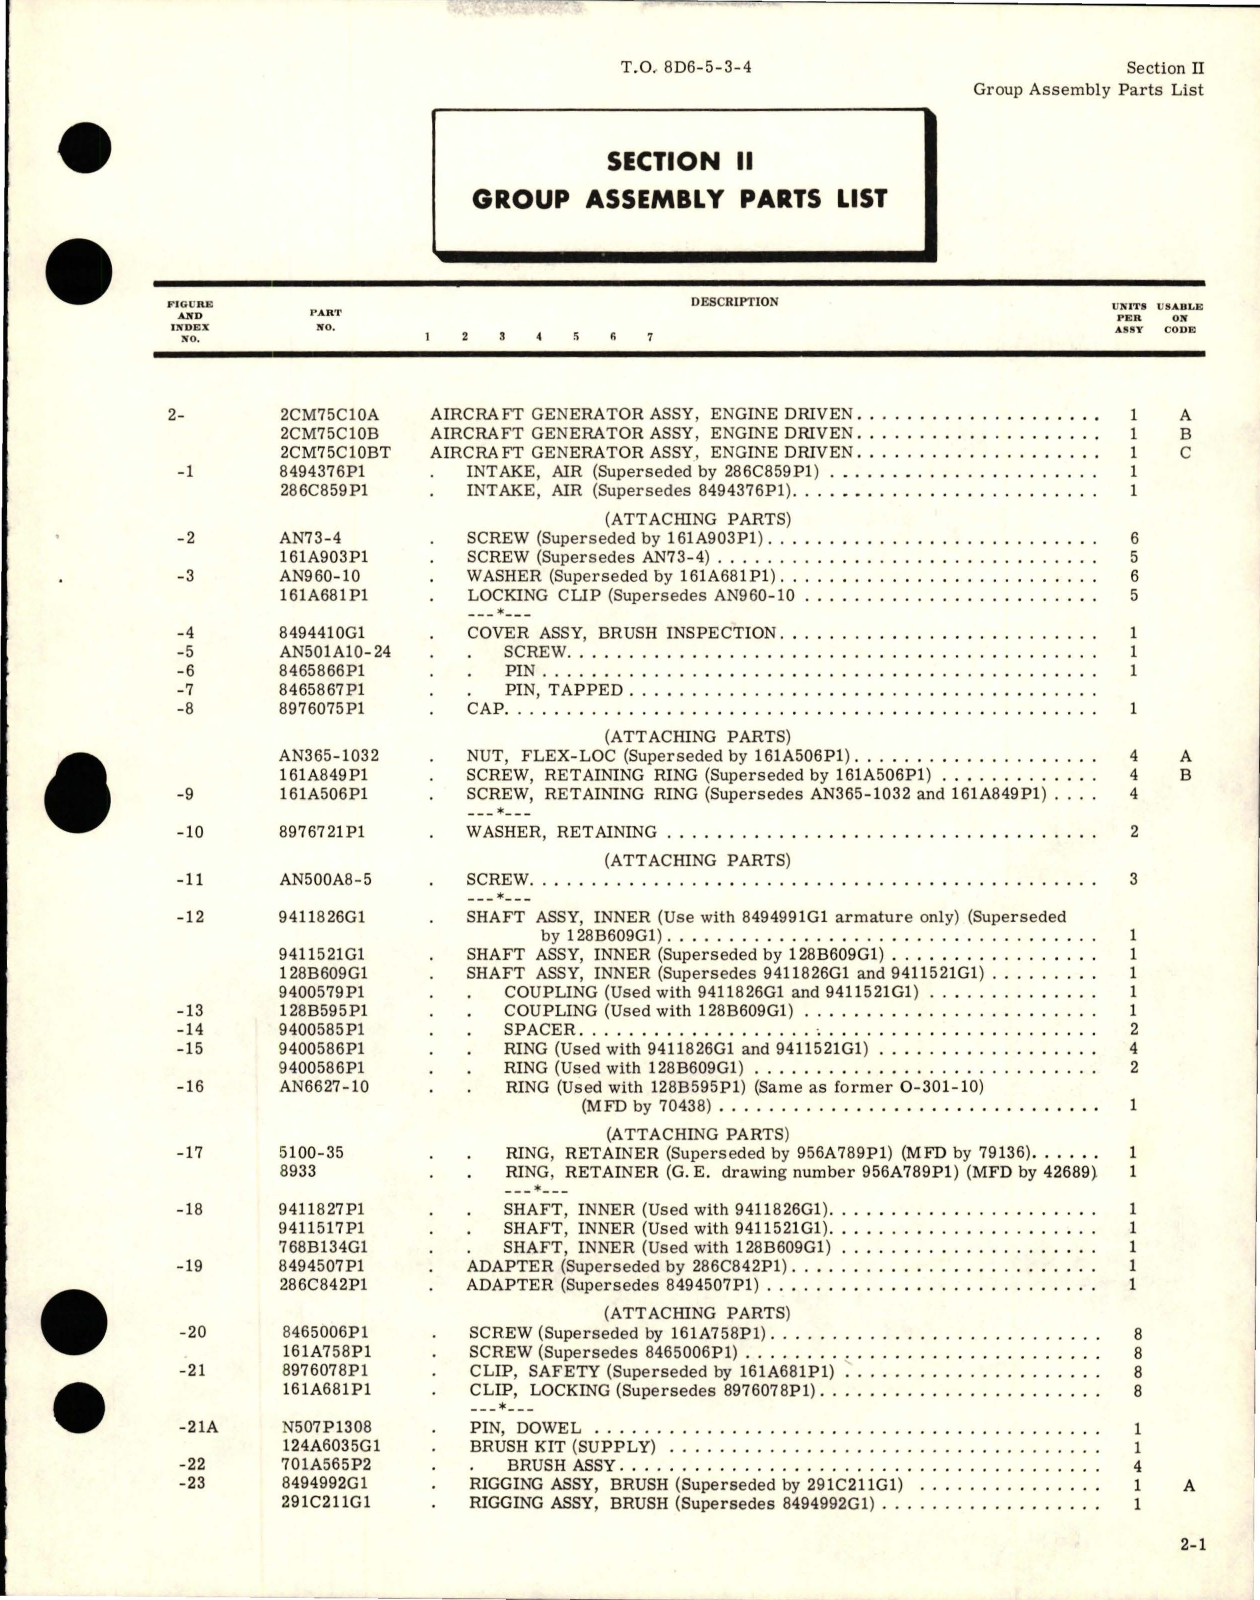 Sample page 5 from AirCorps Library document: Illustrated Parts Breakdown for Engine Driven Generator - Models 2CM75C10A, 2CM75C10B, and 2CM75C10BT